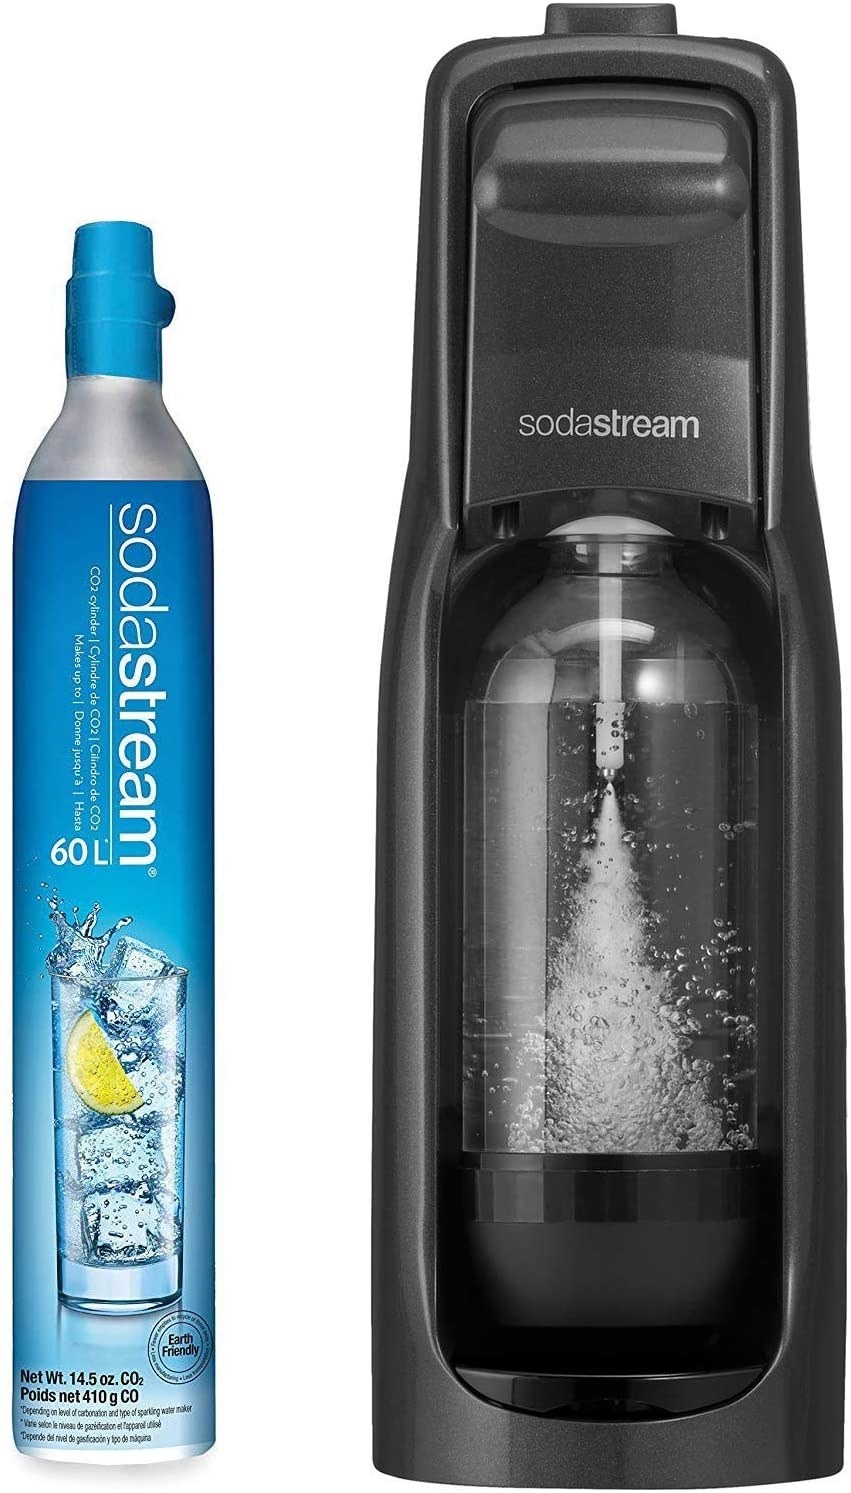 black SodaStream and a CO2 bottle